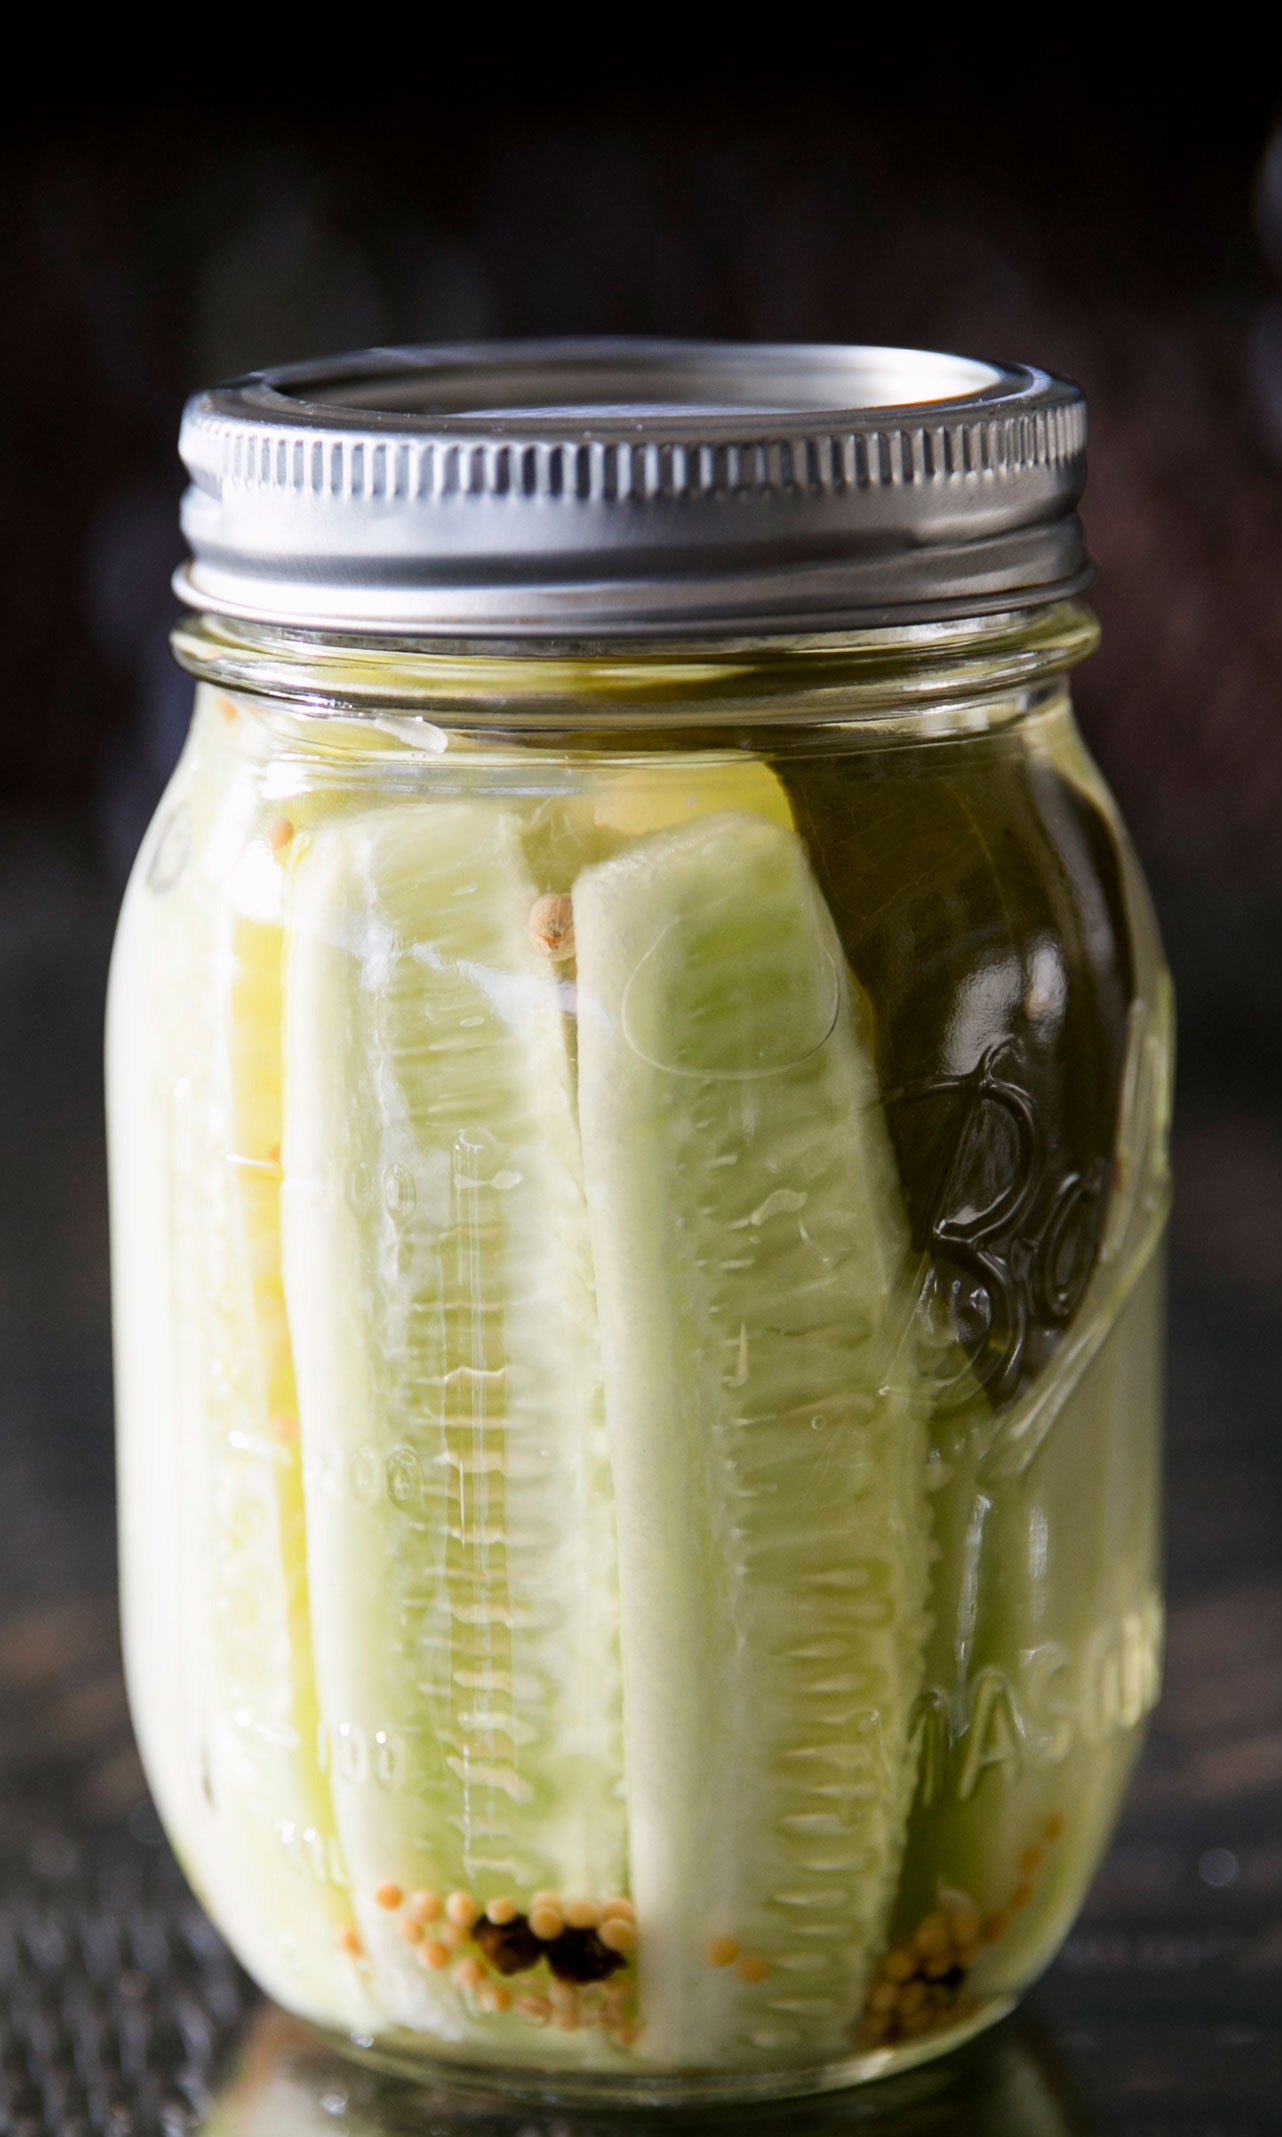 Use Cucumbers to Make Quick Refrigerator Pickles